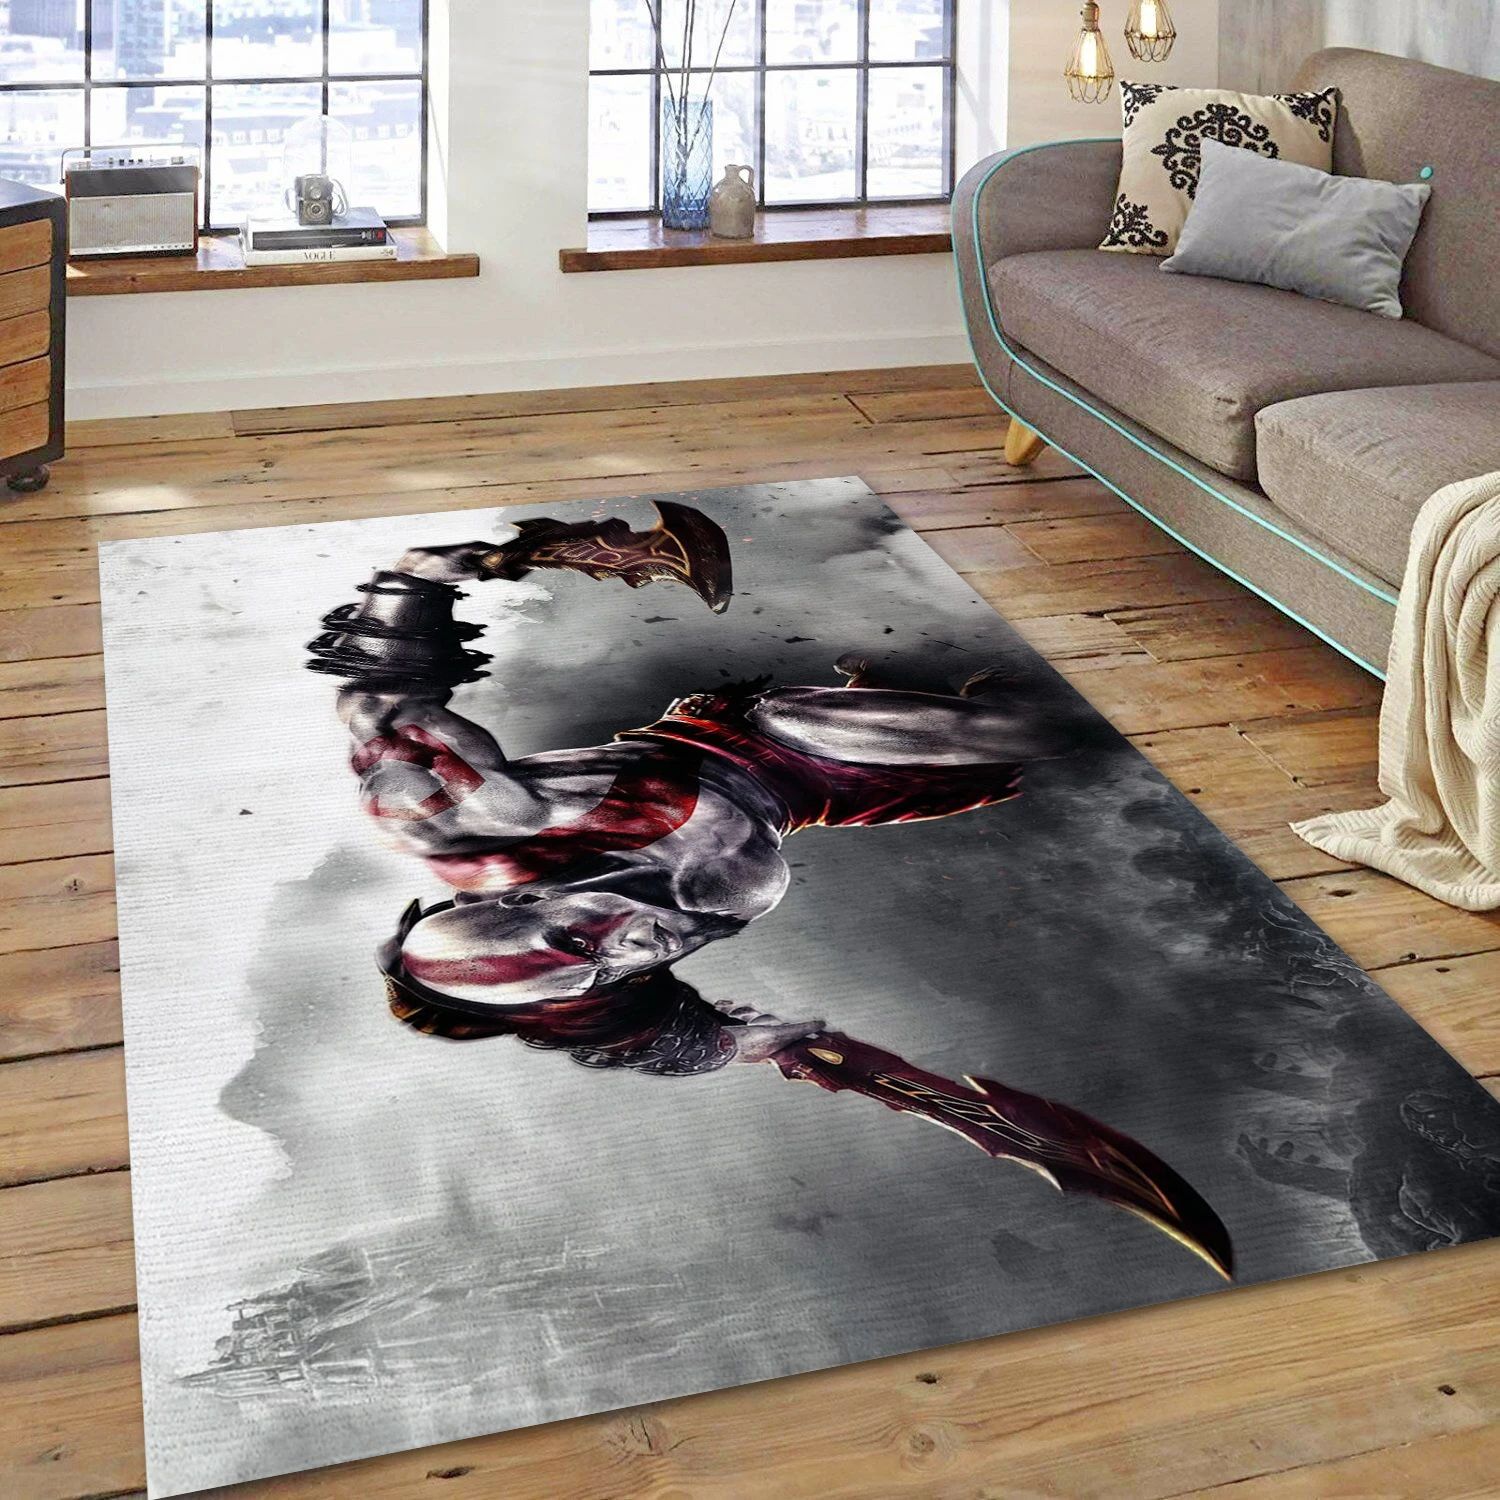 God Of War Video Game Area Rug For Christmas, Area Rug - Home Decor Floor Decor - Indoor Outdoor Rugs 2